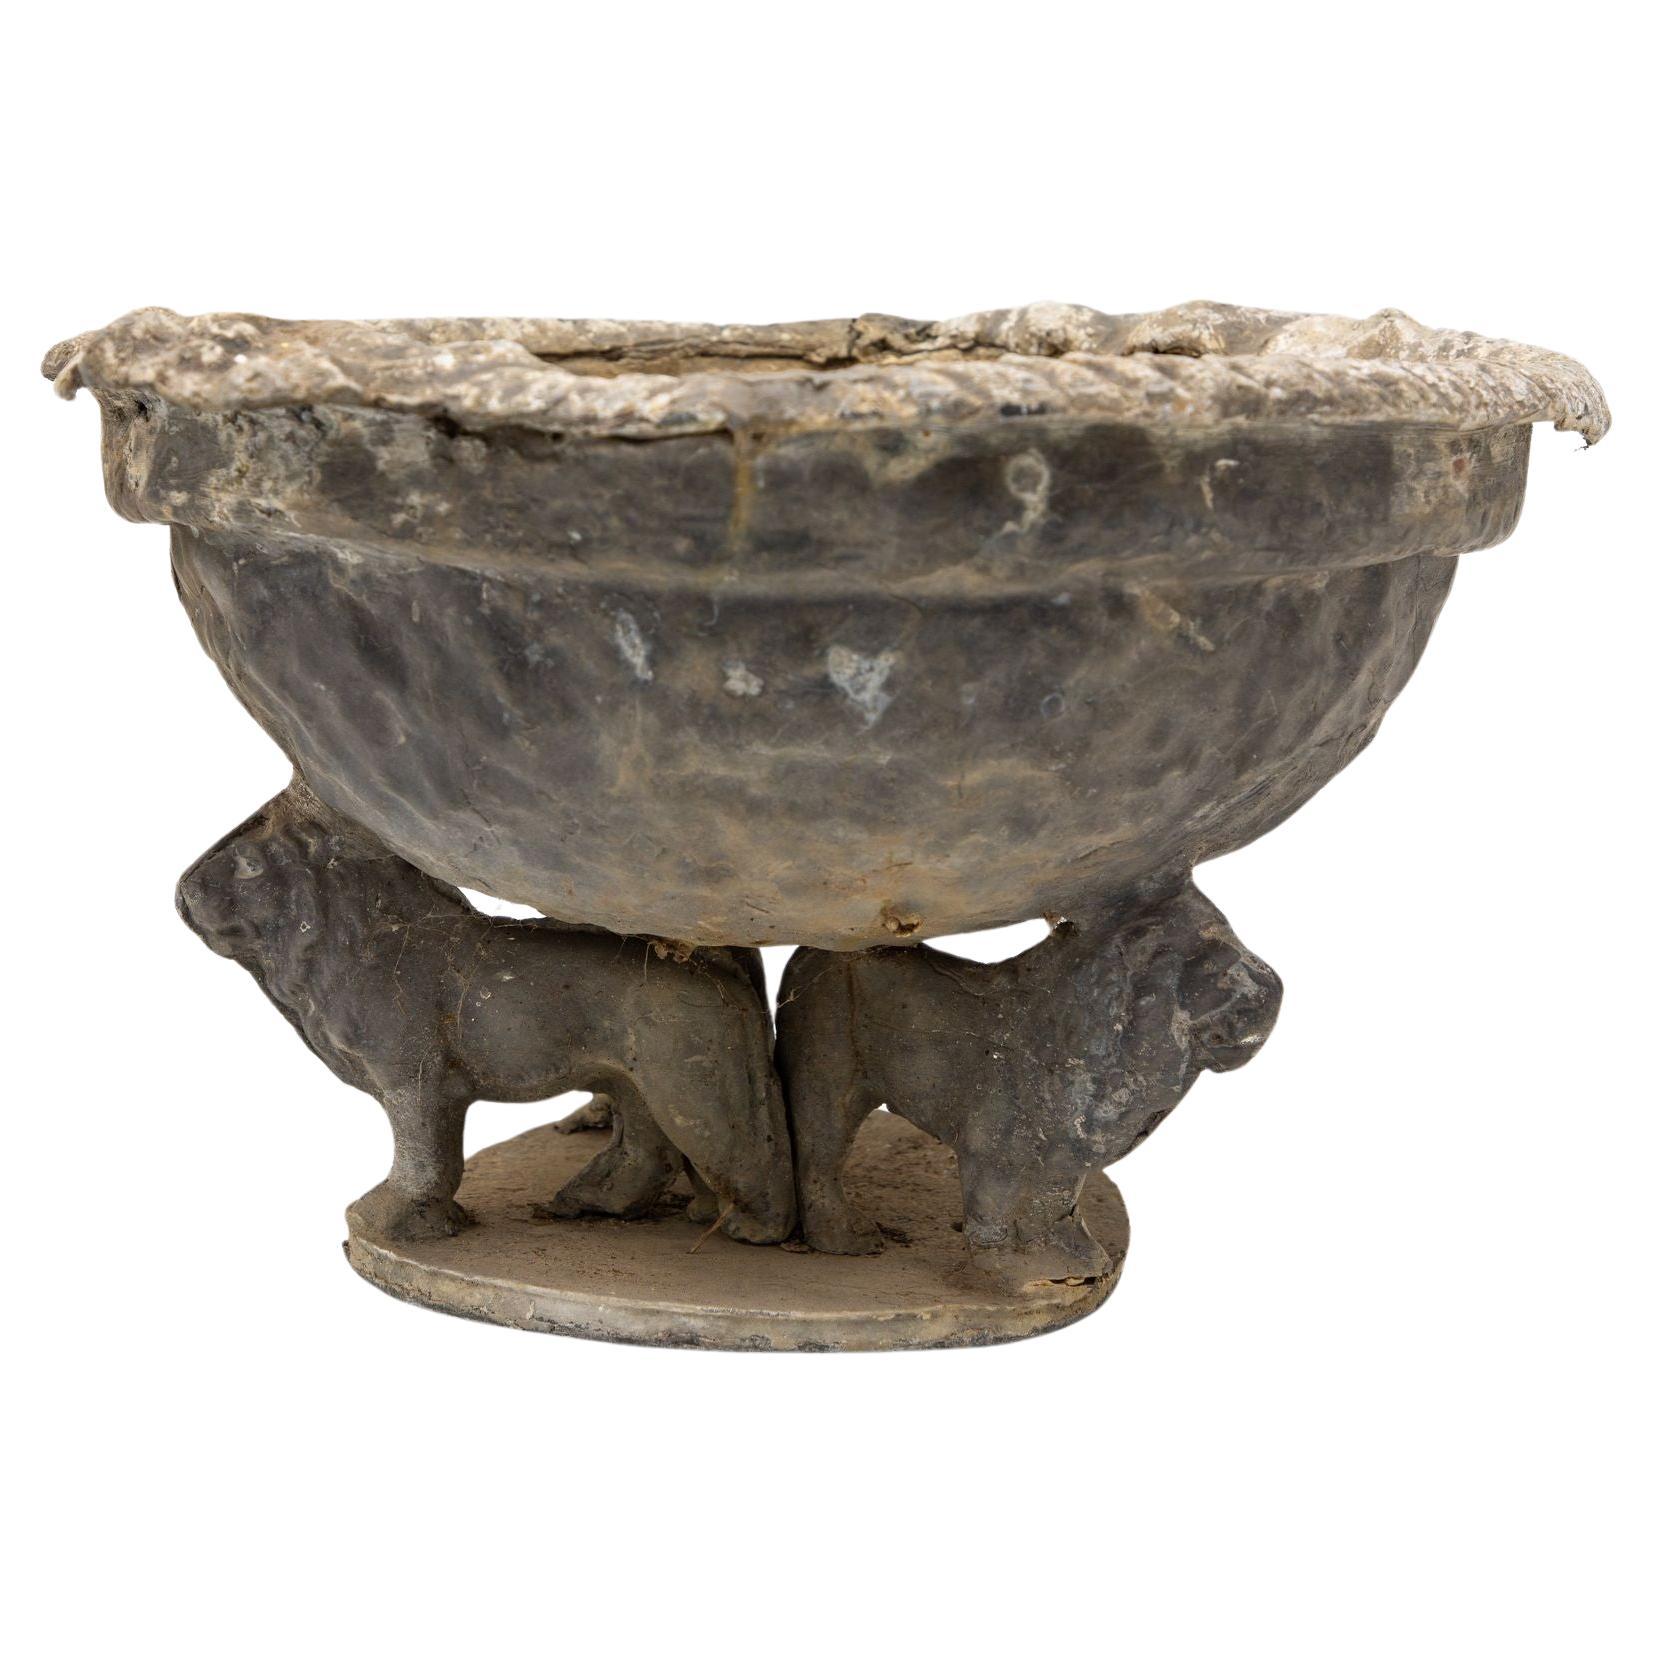 Lead Bird Bath on Lion Supports, late 19th century